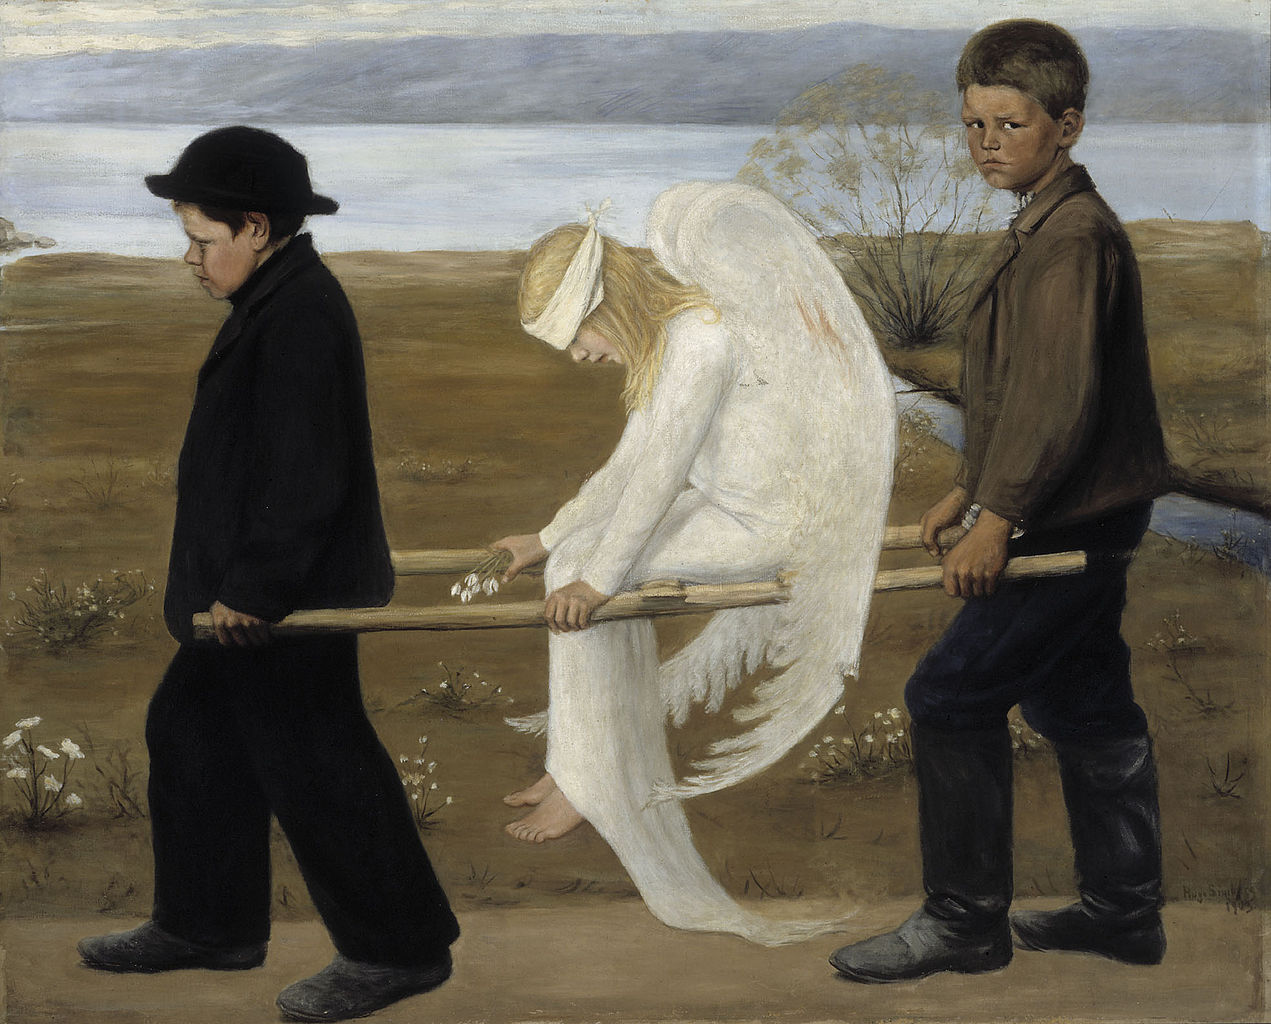 The Wounded Angel by Hugo Simberg - 1903 - 127 x 154 cm Finnish National Gallery